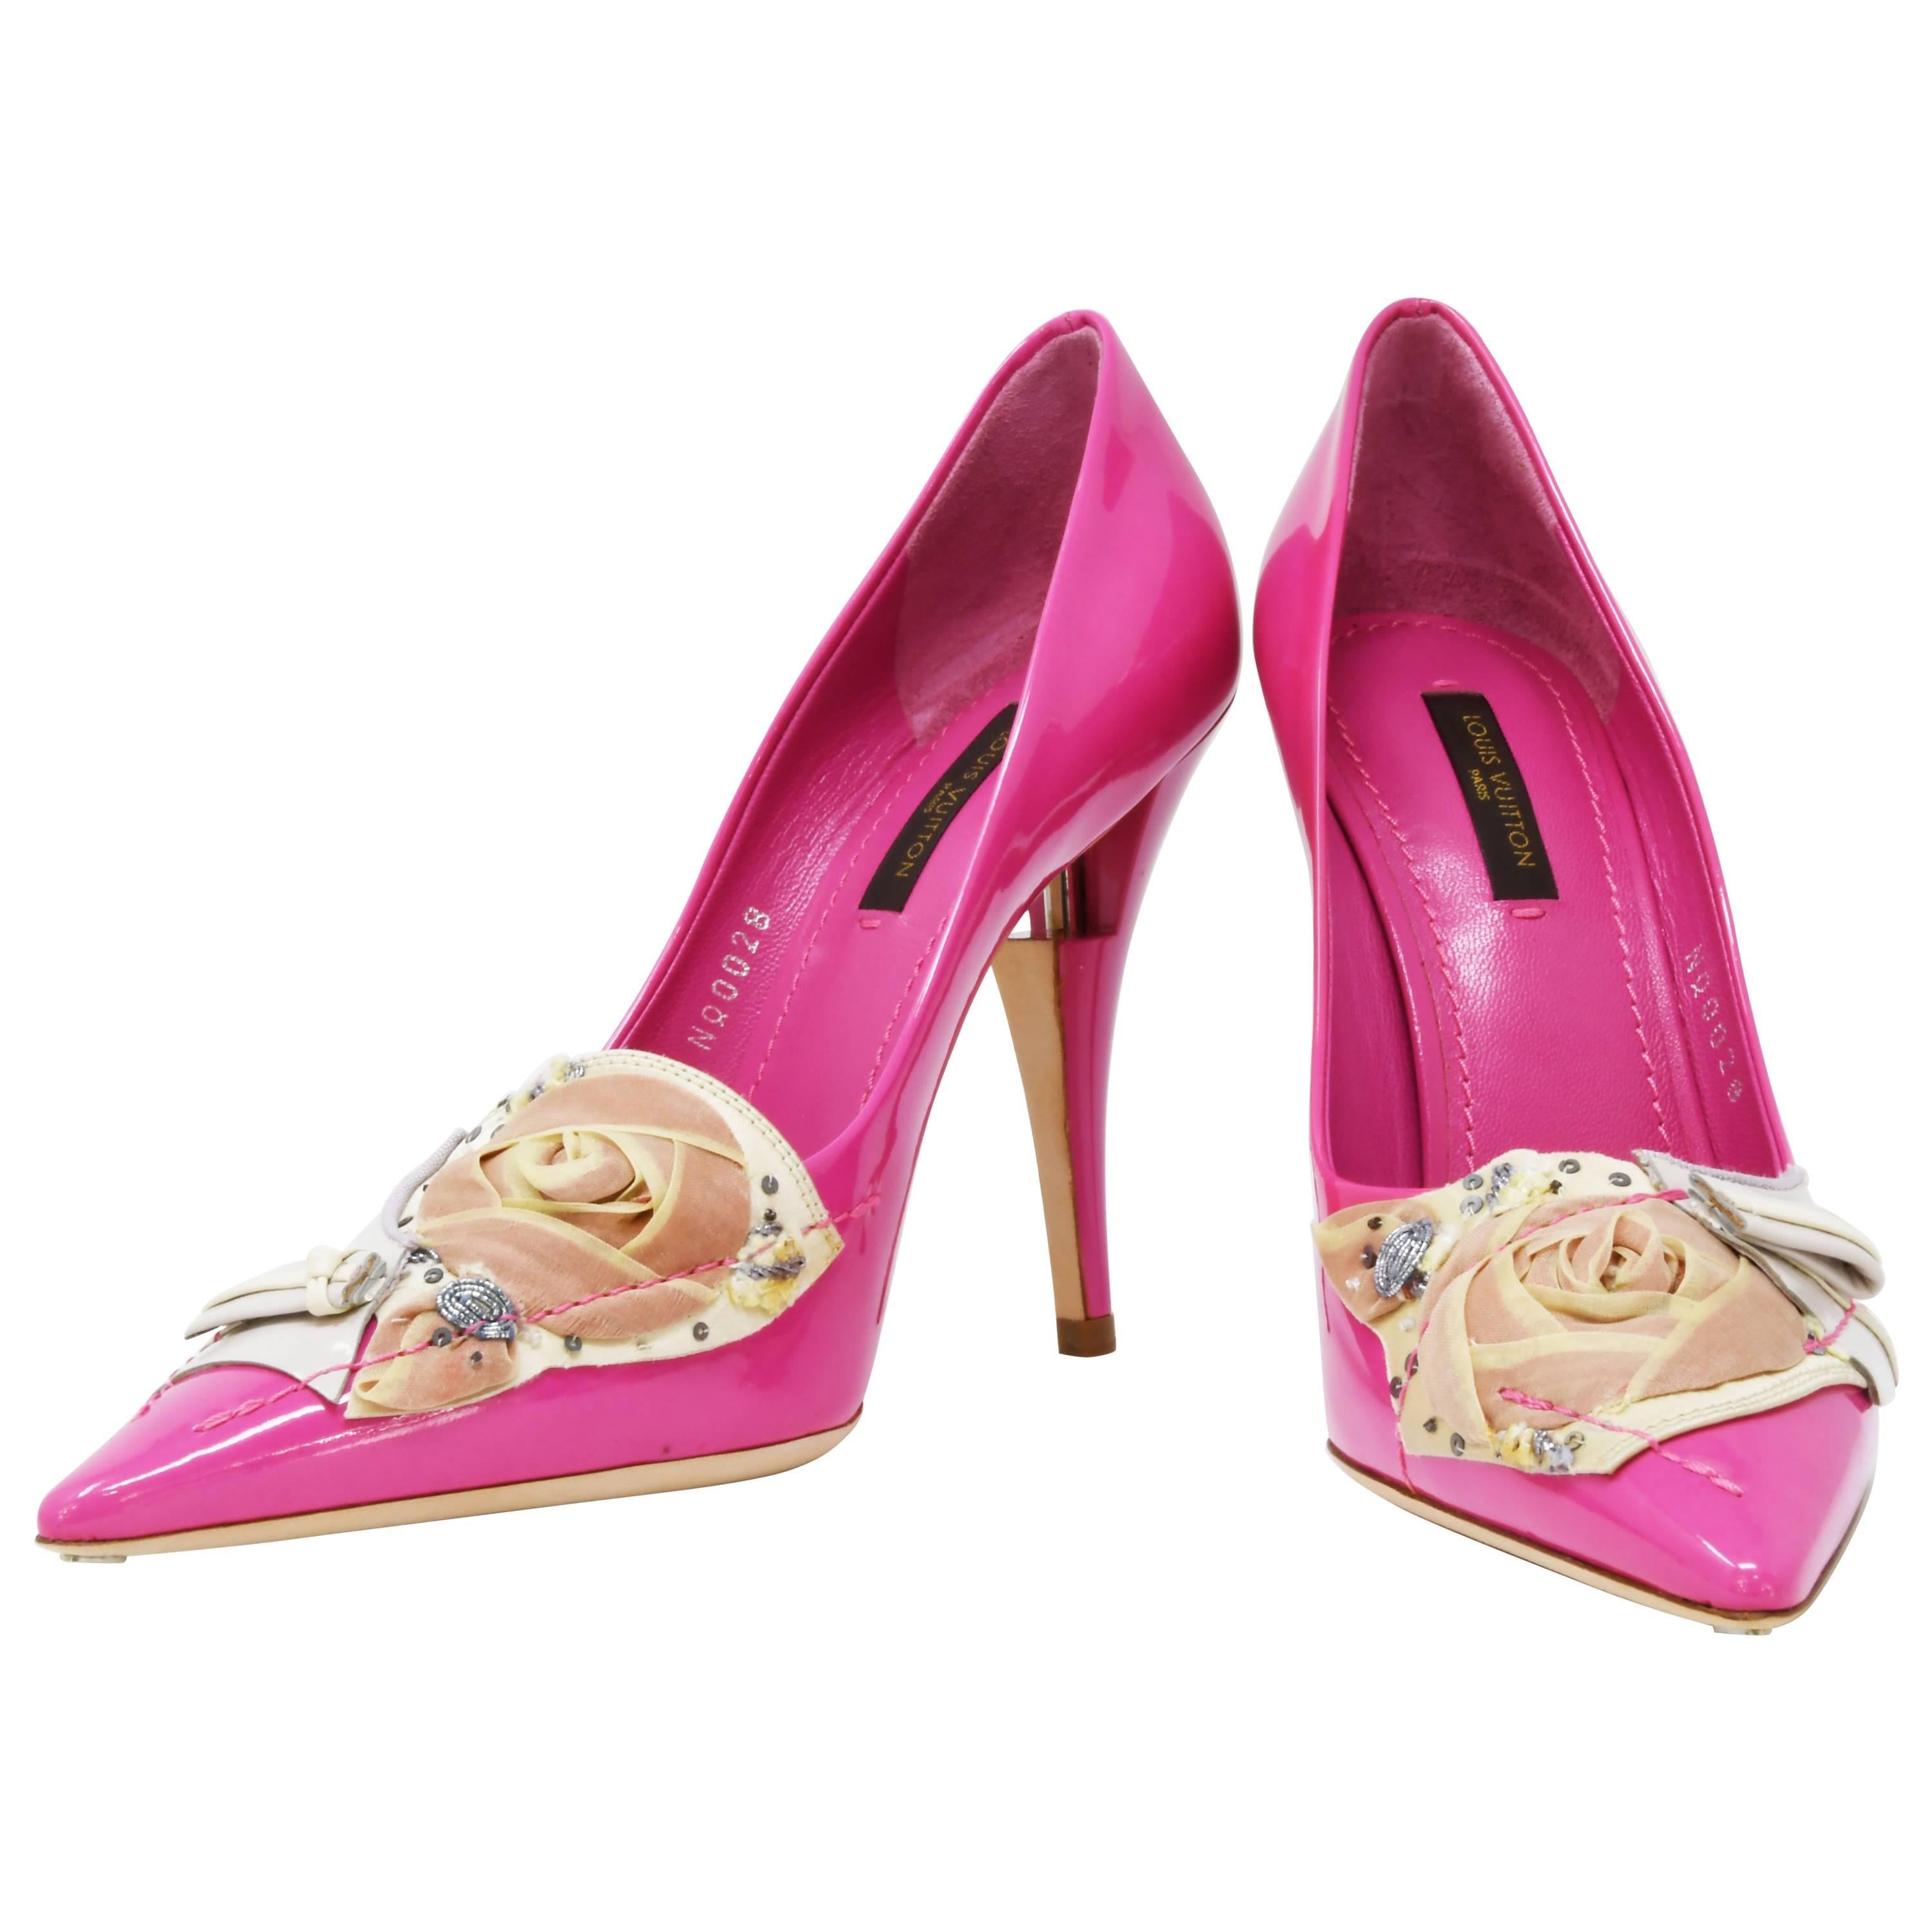 Louis Vuitton After Dark Riviera Fuchsia Patent Leather Pumps, Size 37 For Sale